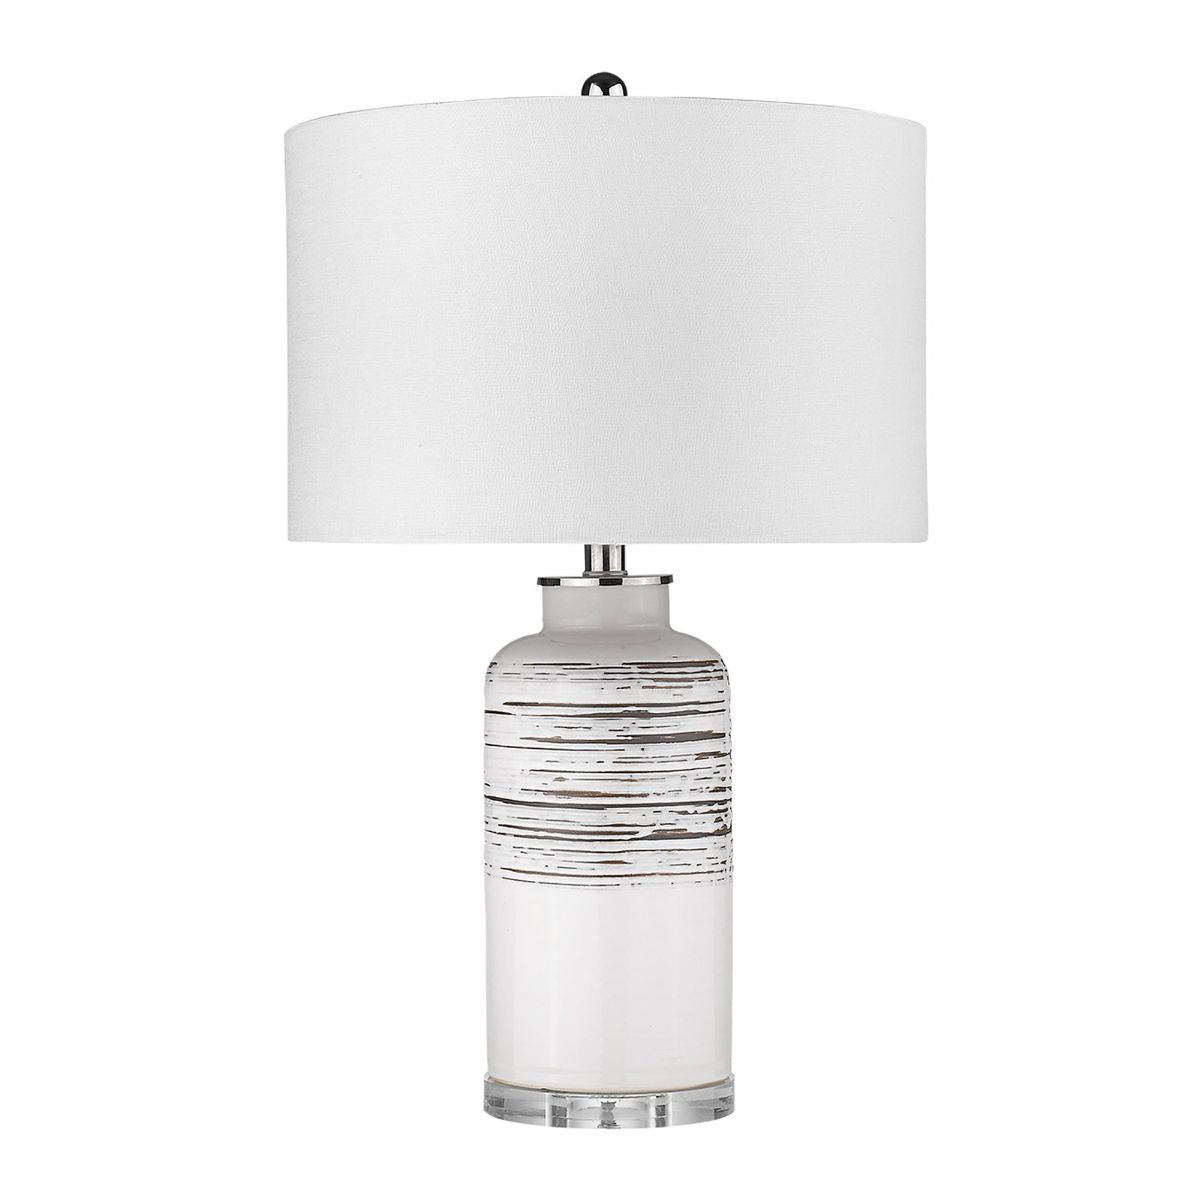 Trend Home 1 Light 25 inches Table Lamp Ceramic Body and Polished Nickel Accents